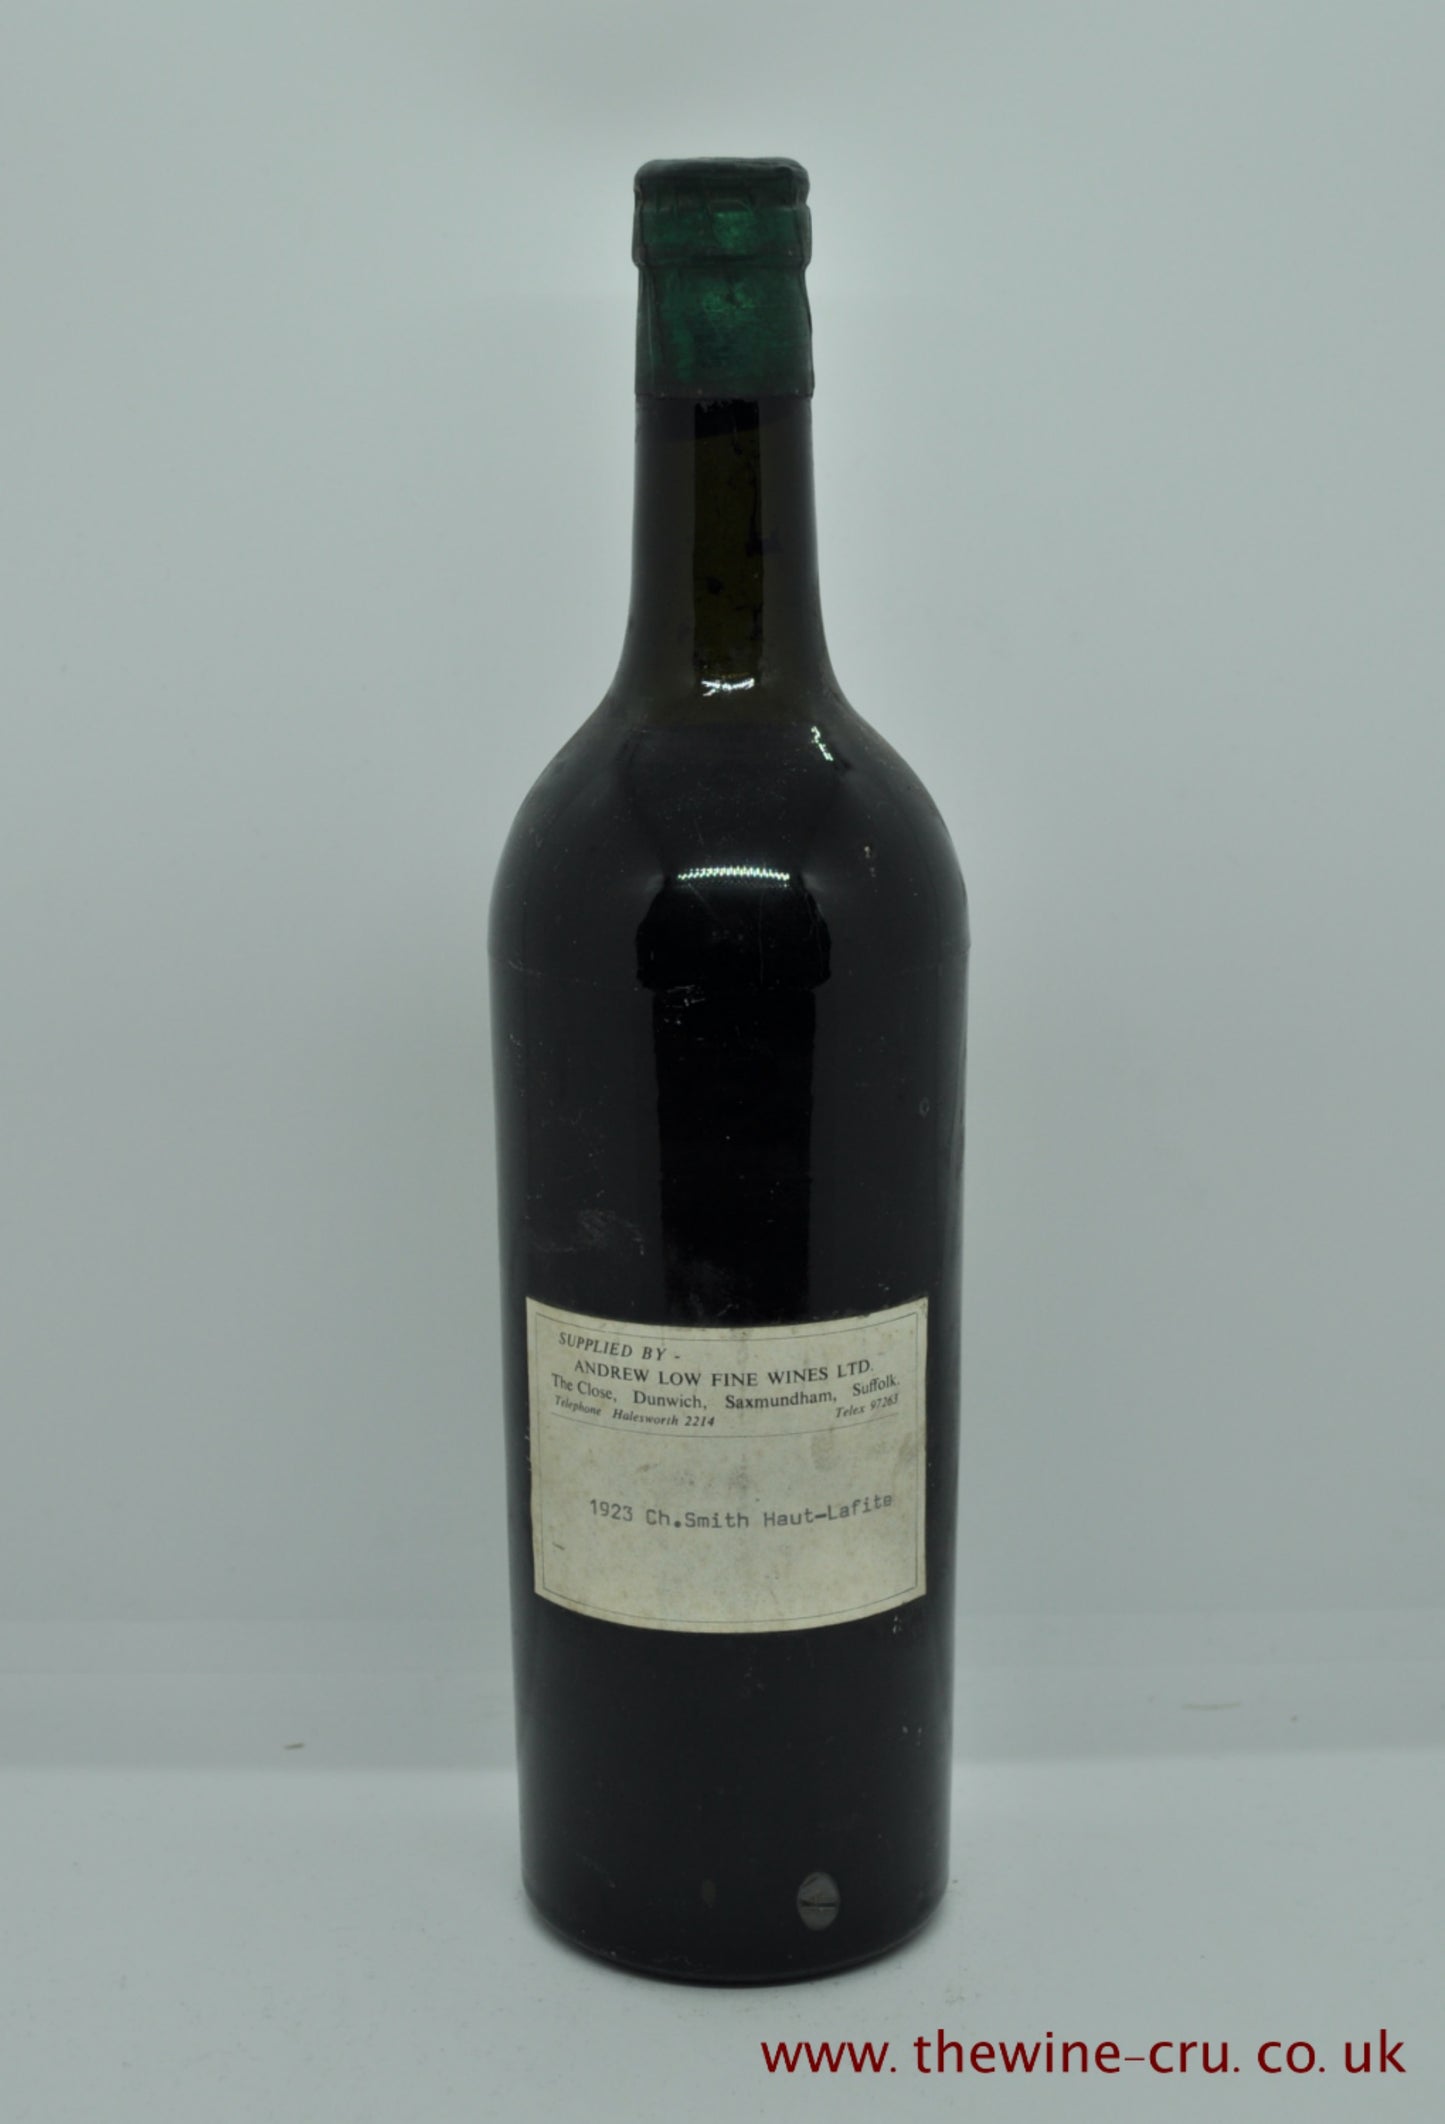 A single 1923 bottle of vintage red wine. Chateau Smith Haut lafite. France, Bordeaux. The bottle is in good condition with a merchants label and a top shoulder level. Immediate delivery. Free local delivery. Gift wrapping available.